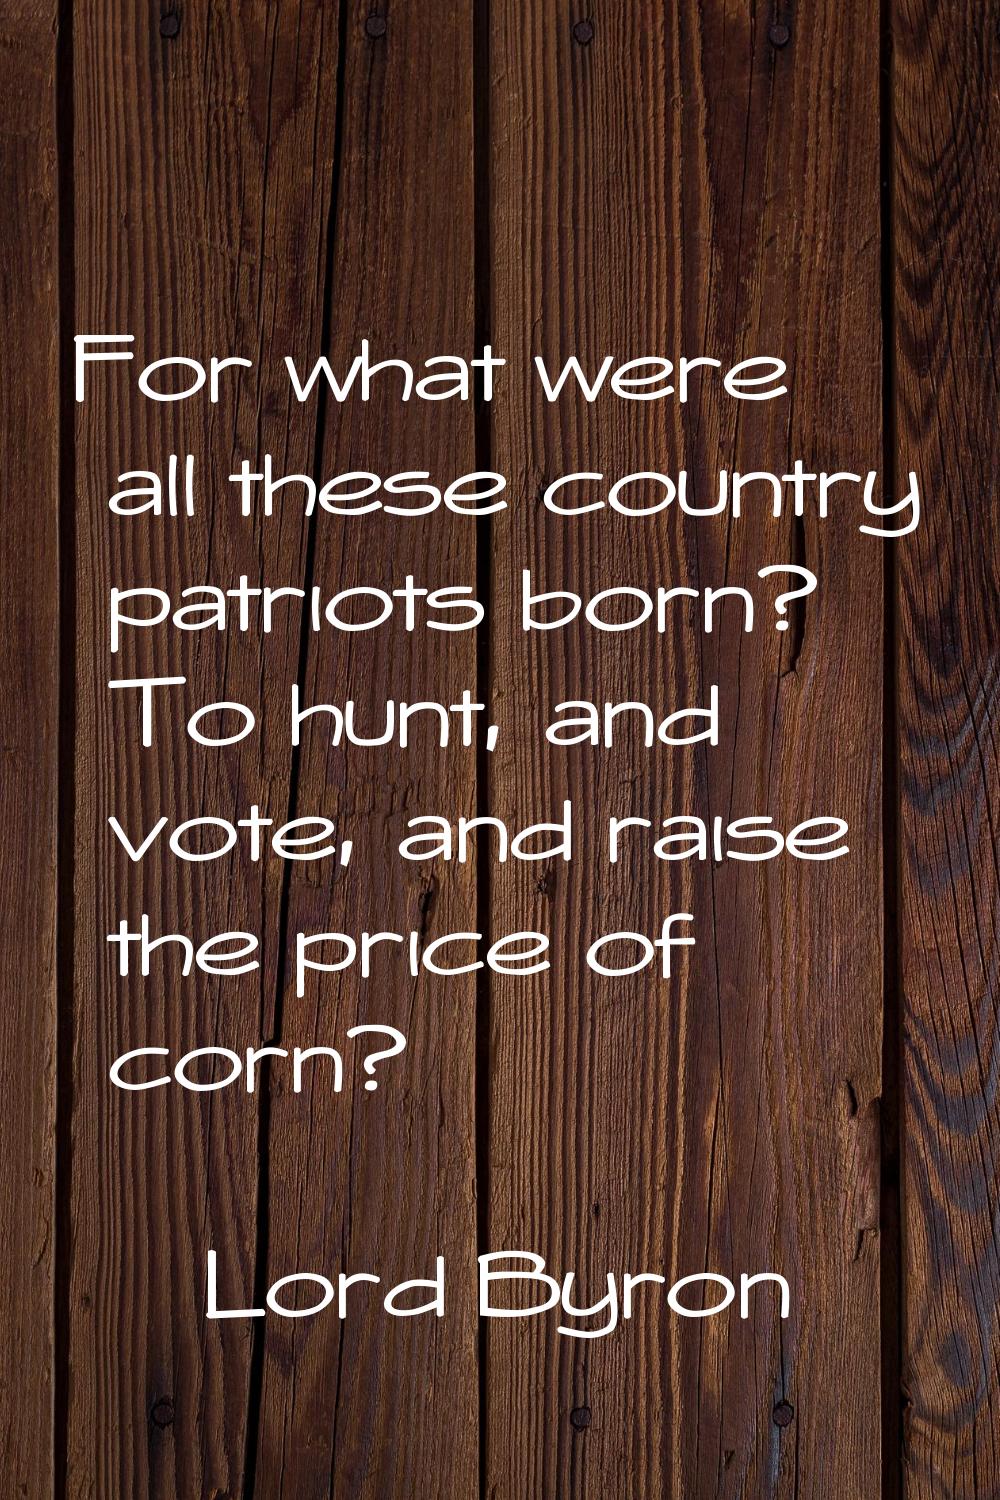 For what were all these country patriots born? To hunt, and vote, and raise the price of corn?